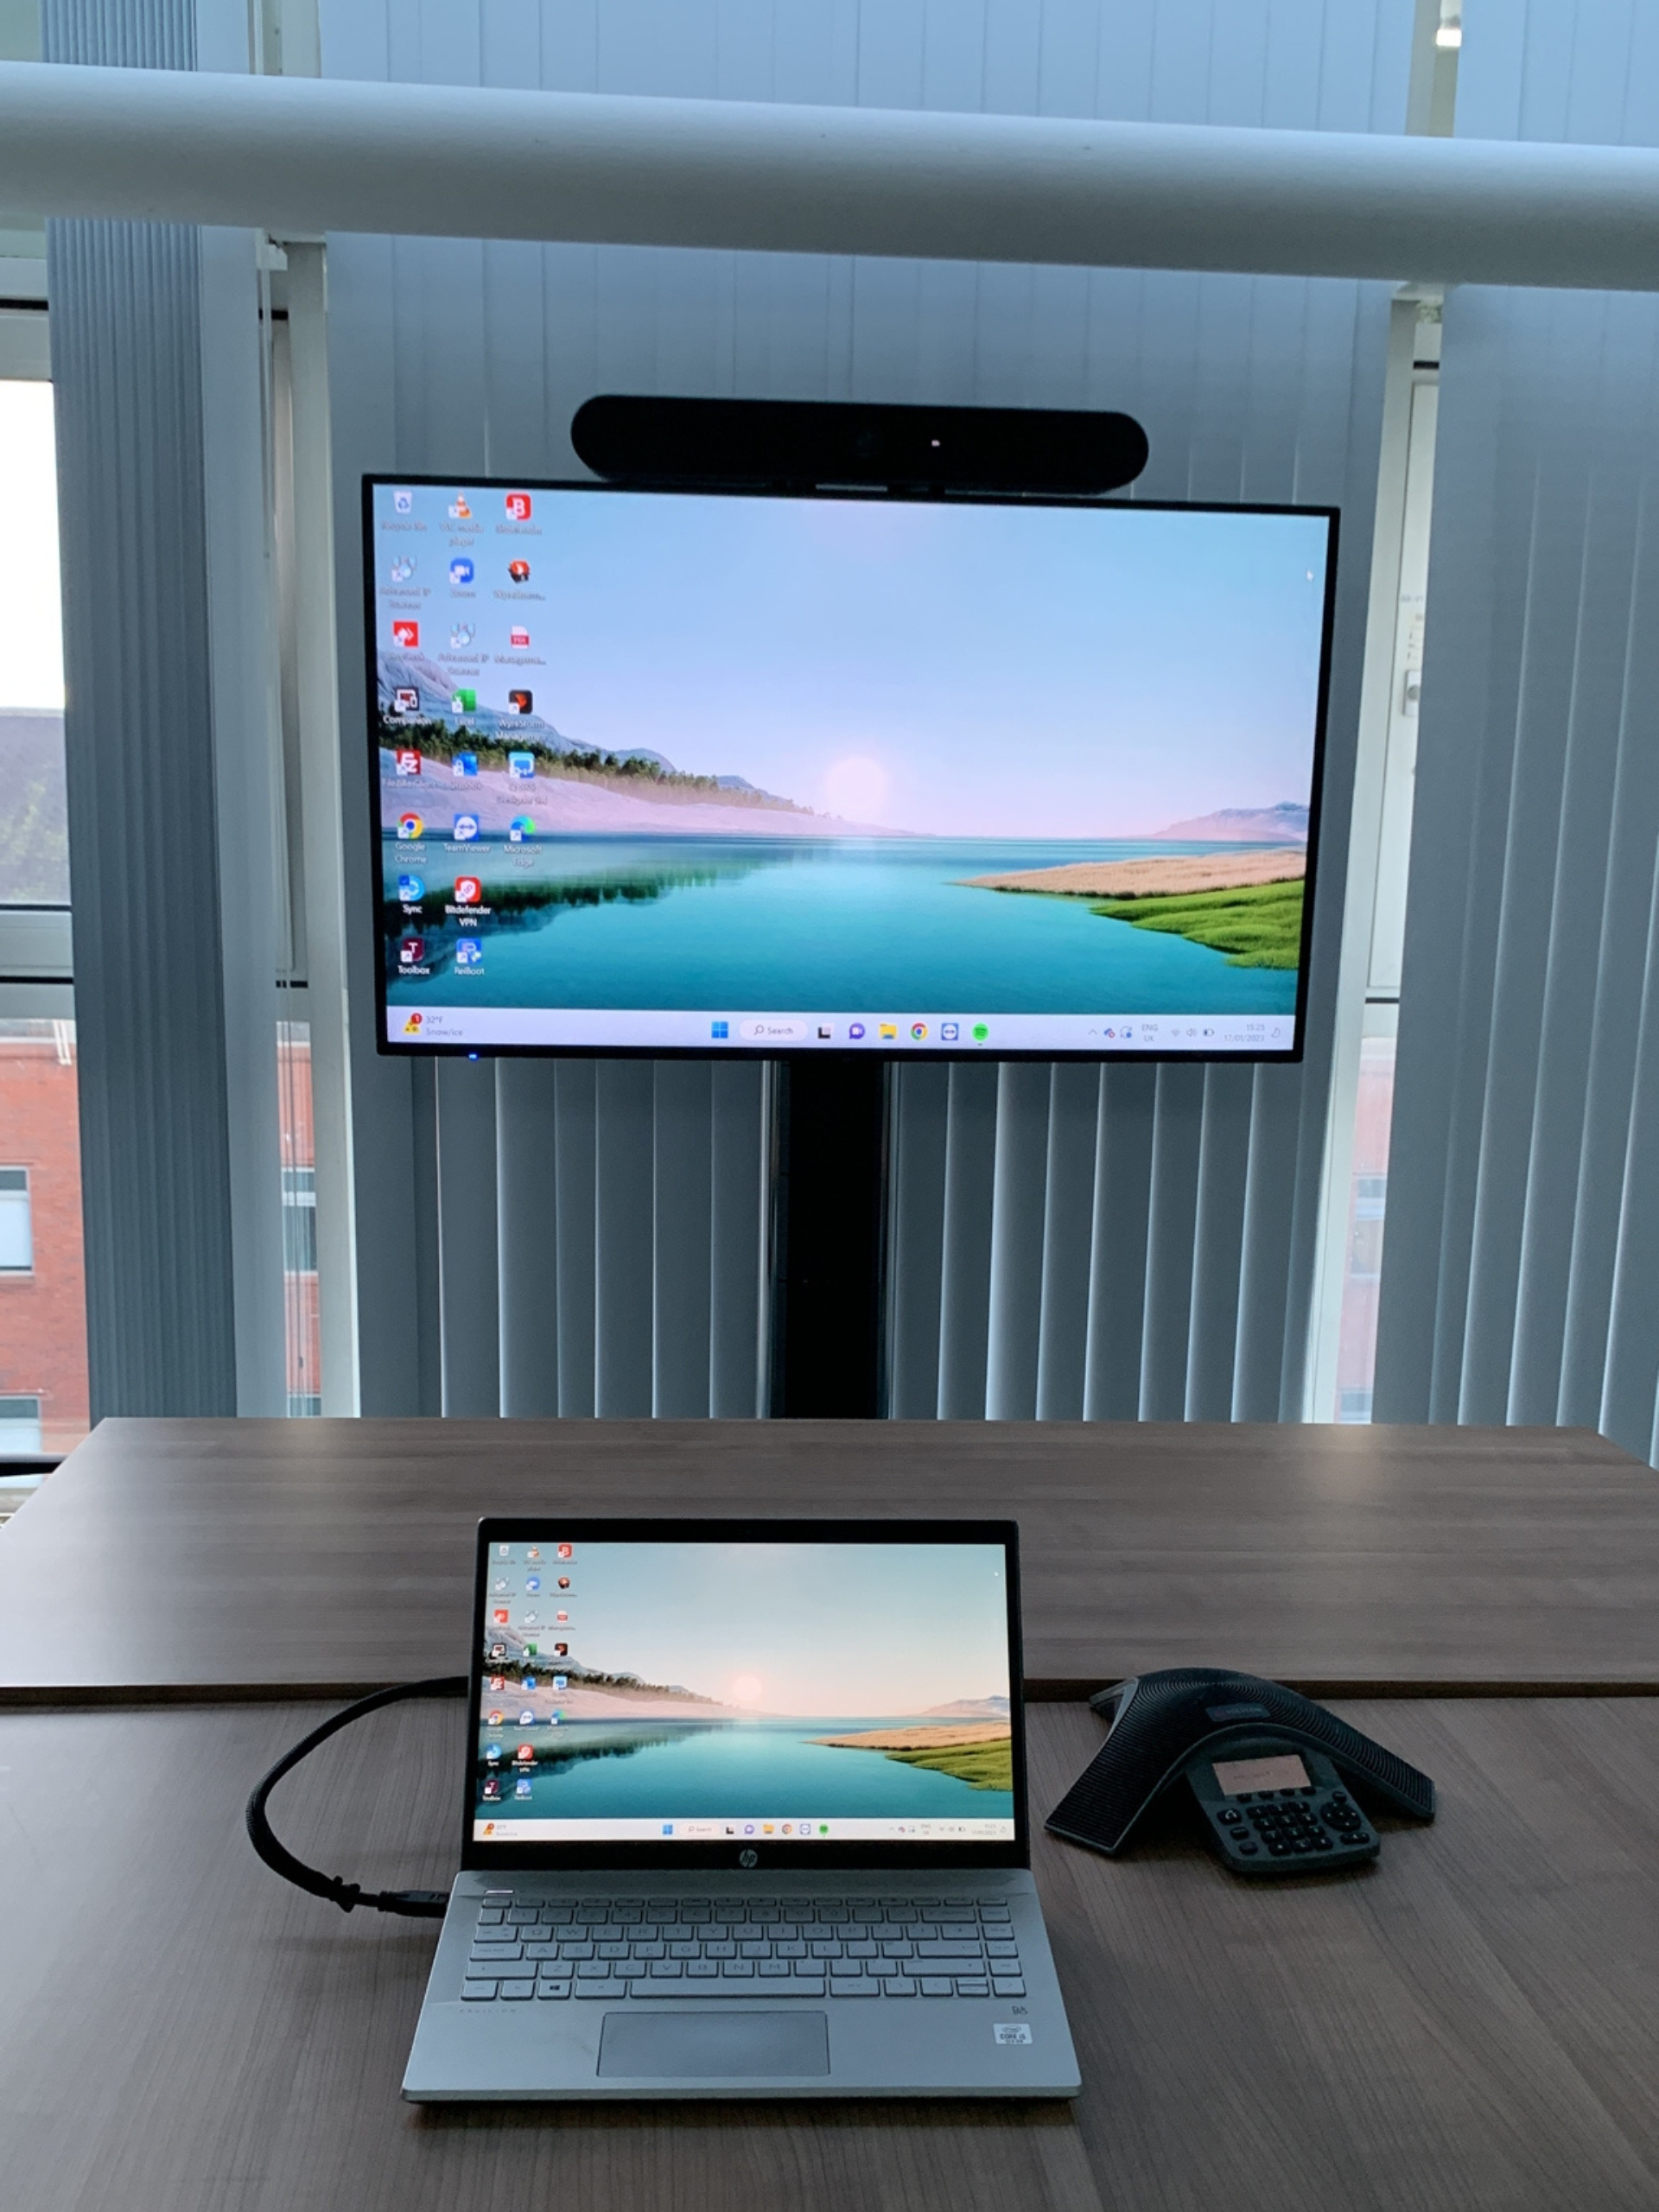 Mobile conferencing solution for office space with glass window